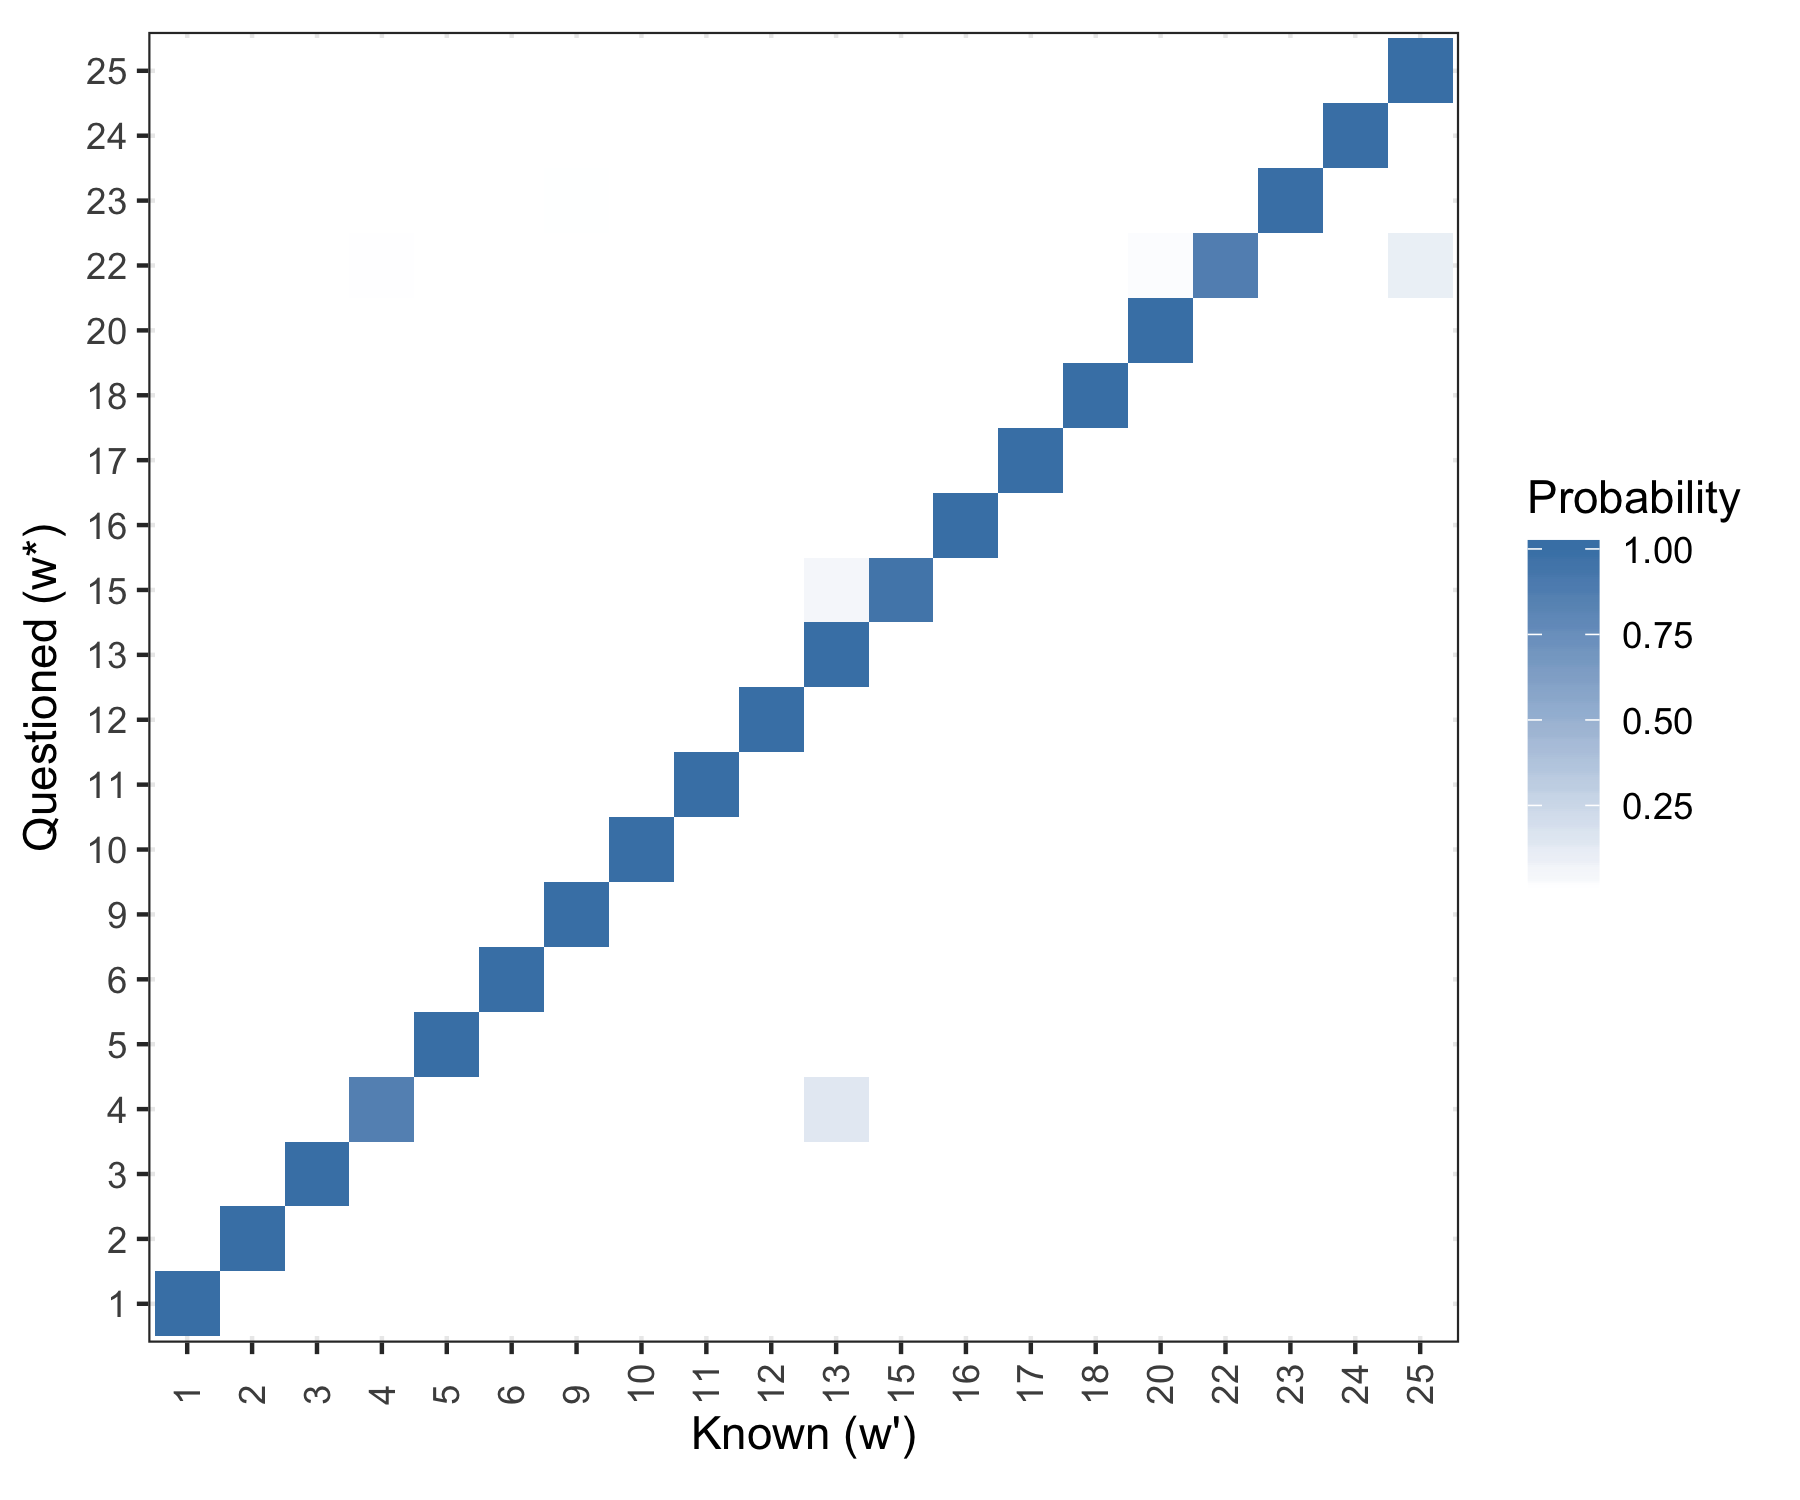 Posterior predictive results. Rows are evaluated independently and the probability in each row sums to one.